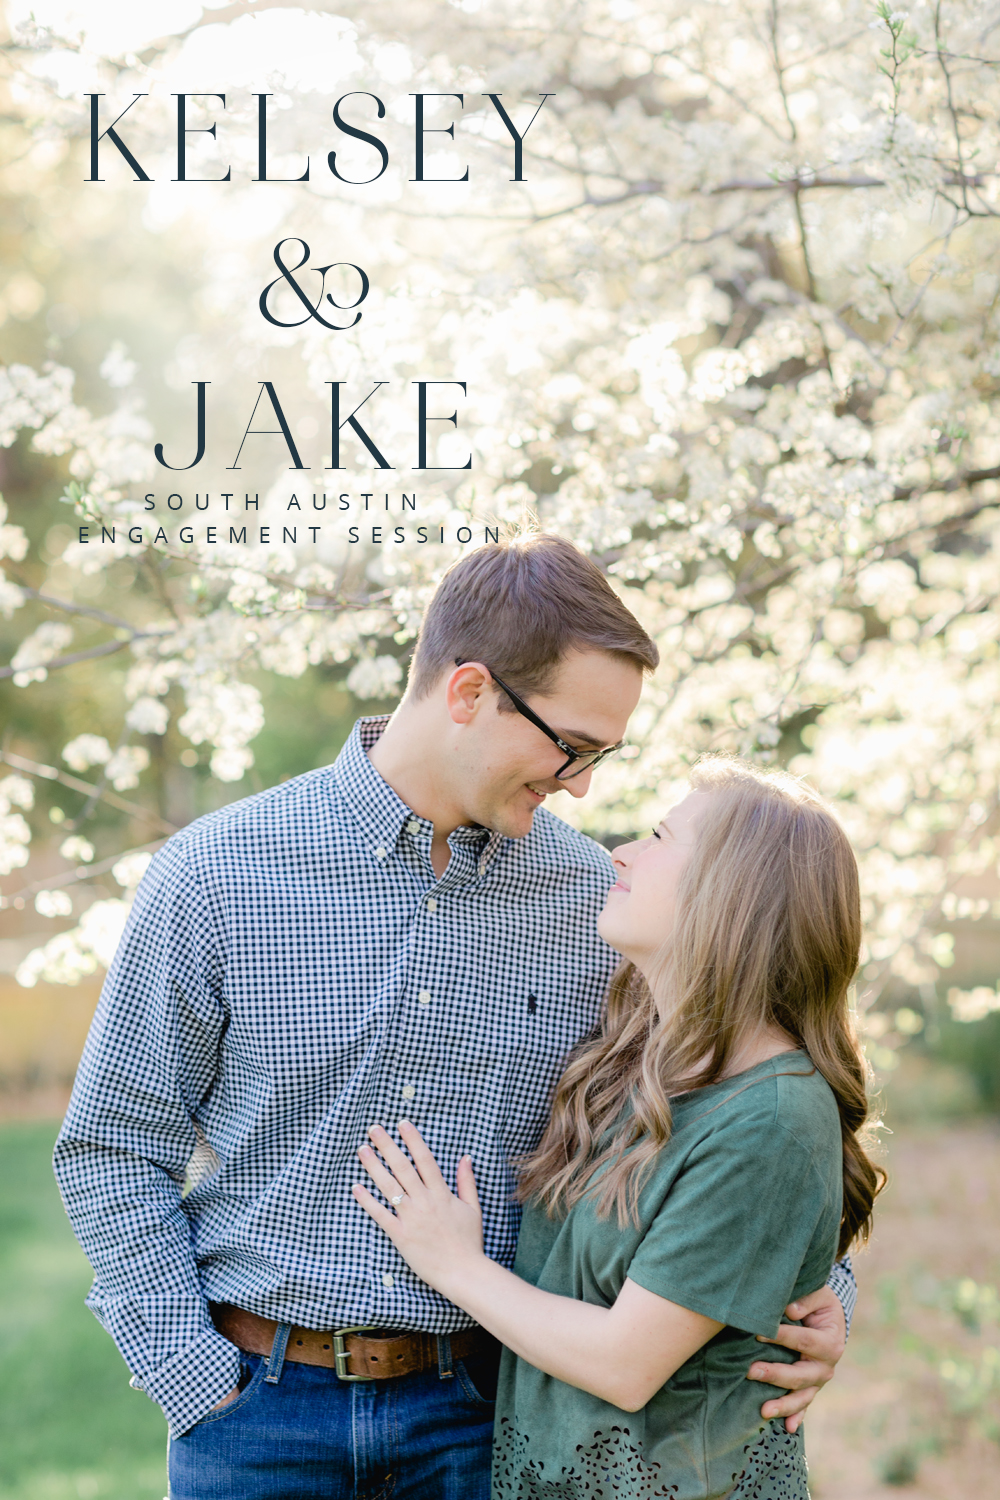 This engagement session features THREE outfits, and TWO locations!! Which one of Kelsey’s outfits are your favorite? It’s hard for me to choose...Click through to pick your favorite!